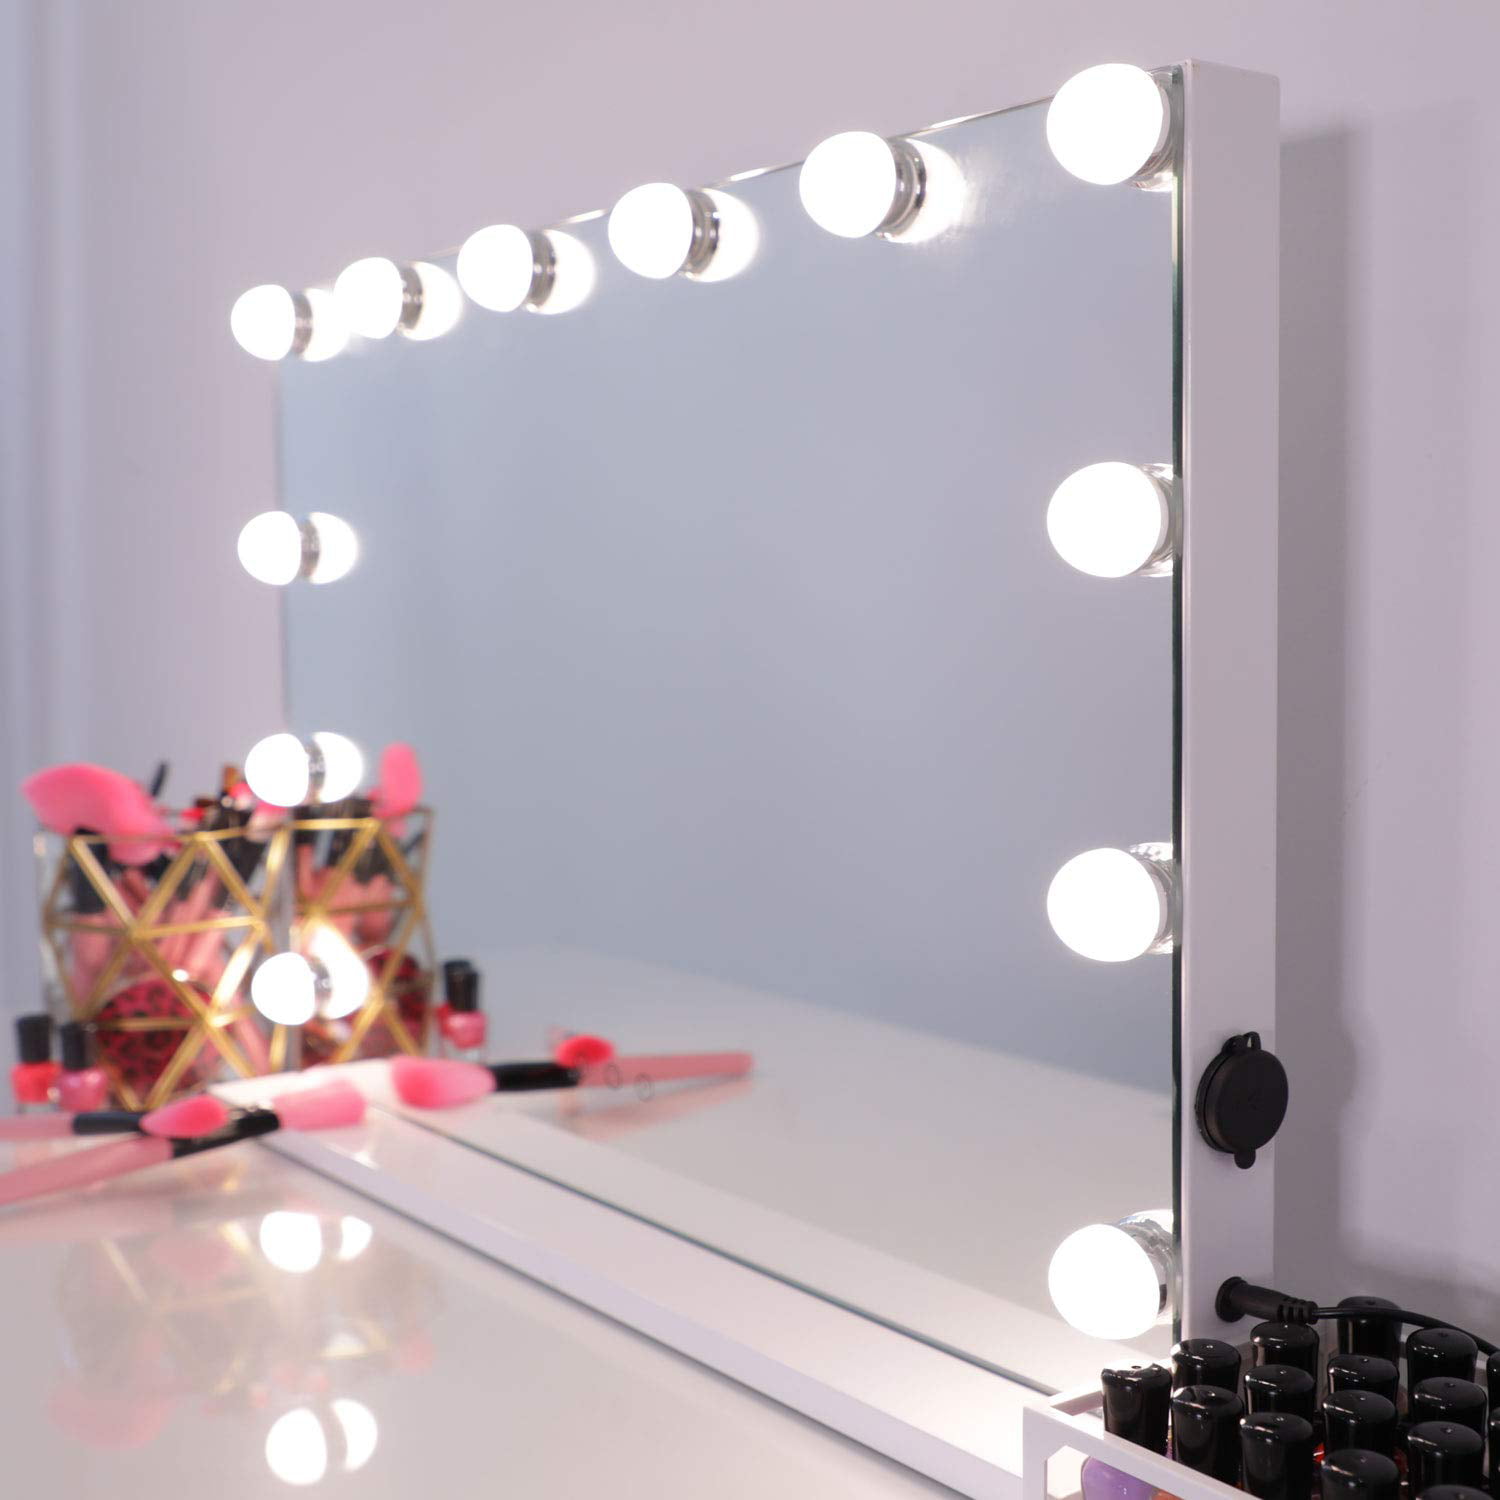 Stick on LED Mirror Light Kit for Makeup Vanity Hollywood Mirror Lights for Dressing Table or Vanity Set Hollywood Style LED Vanity Mirror Lights Kit with Dimmable Light Bulbs 14 LED Bulbs